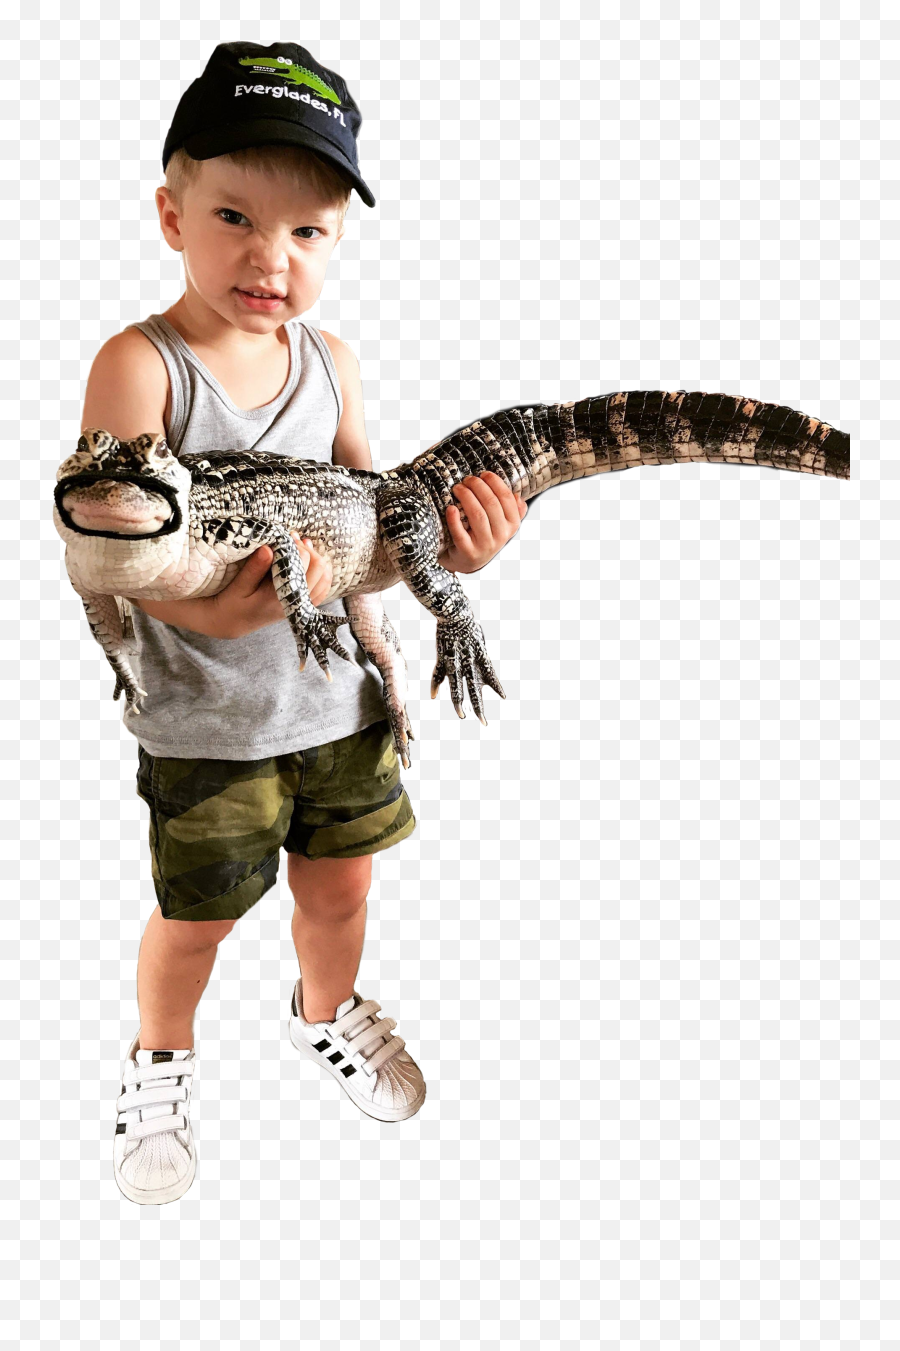 3 Year Old Holding An Alligator - Imgur 3 Year Old Transparent Png,Alligator Transparent Background